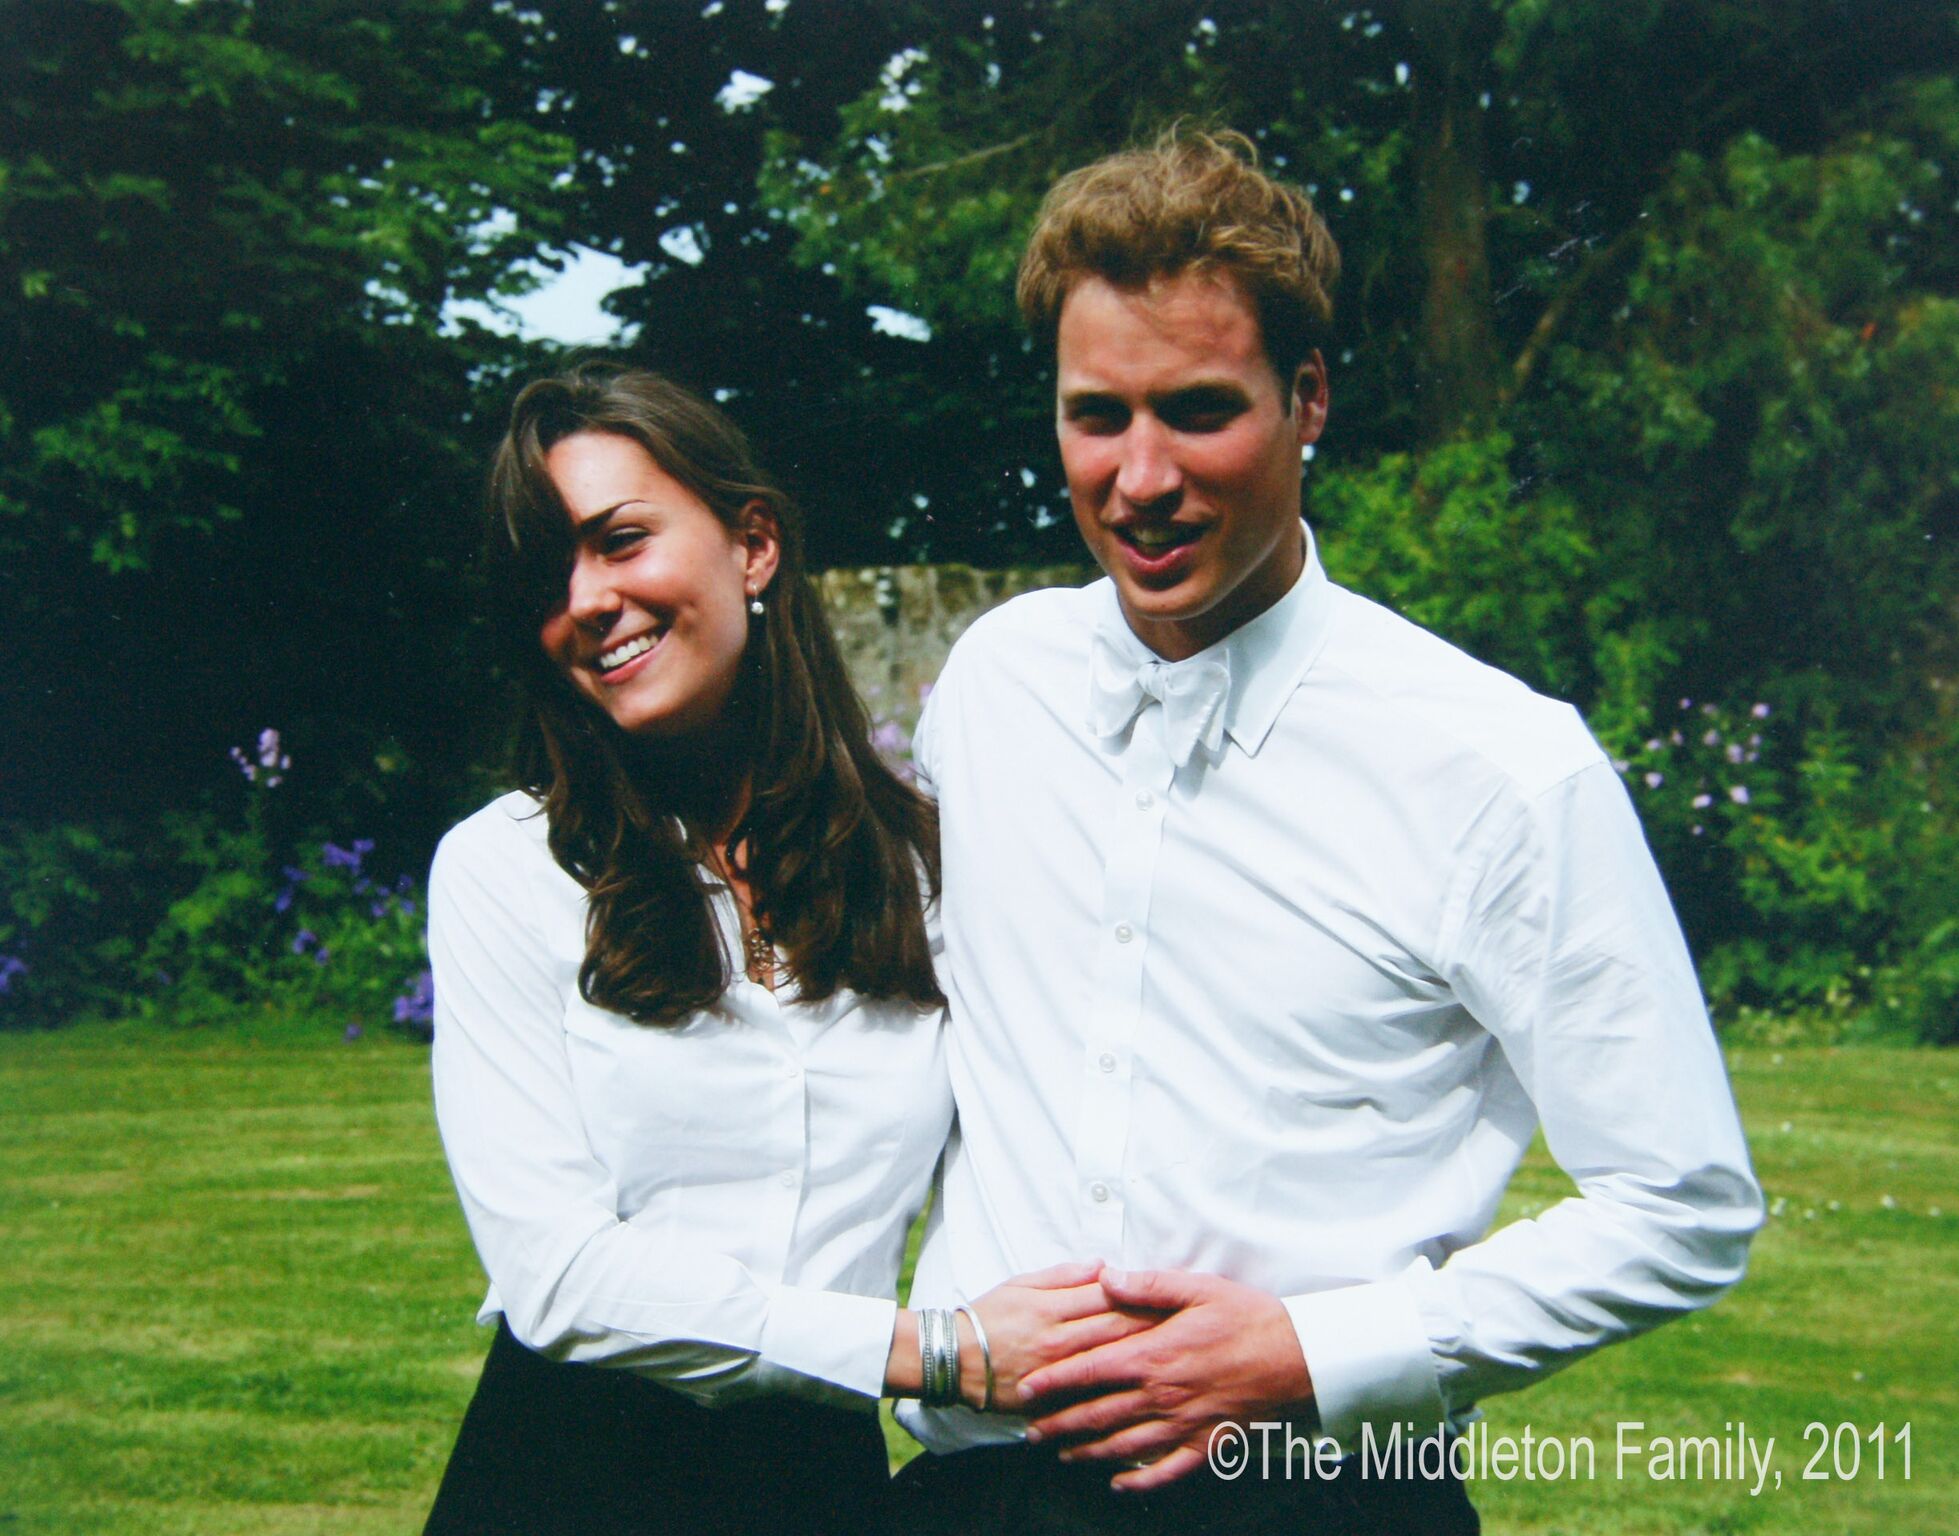 Prince William and Kate Middleton at St Andrews | Getty Images